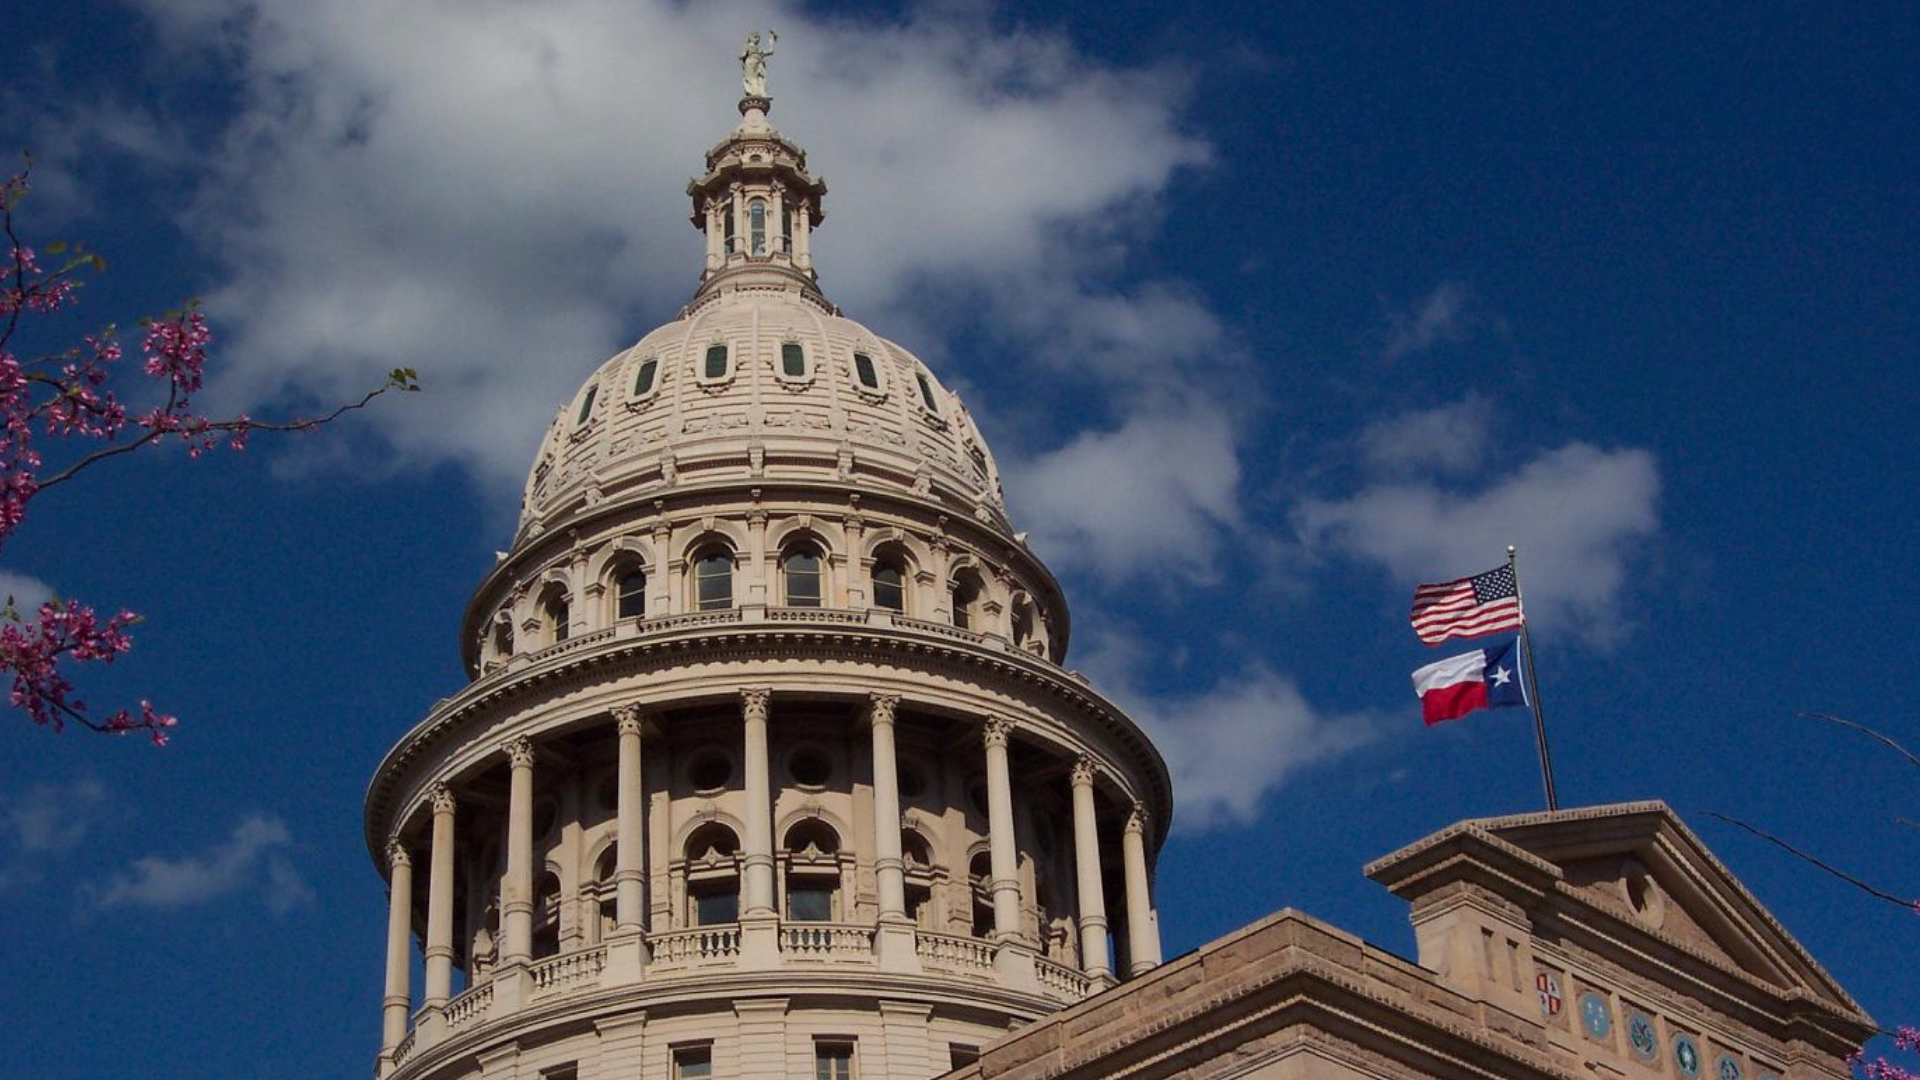 The legislation aims to modify how Texas prevents and prepares for energy emergencies to come.